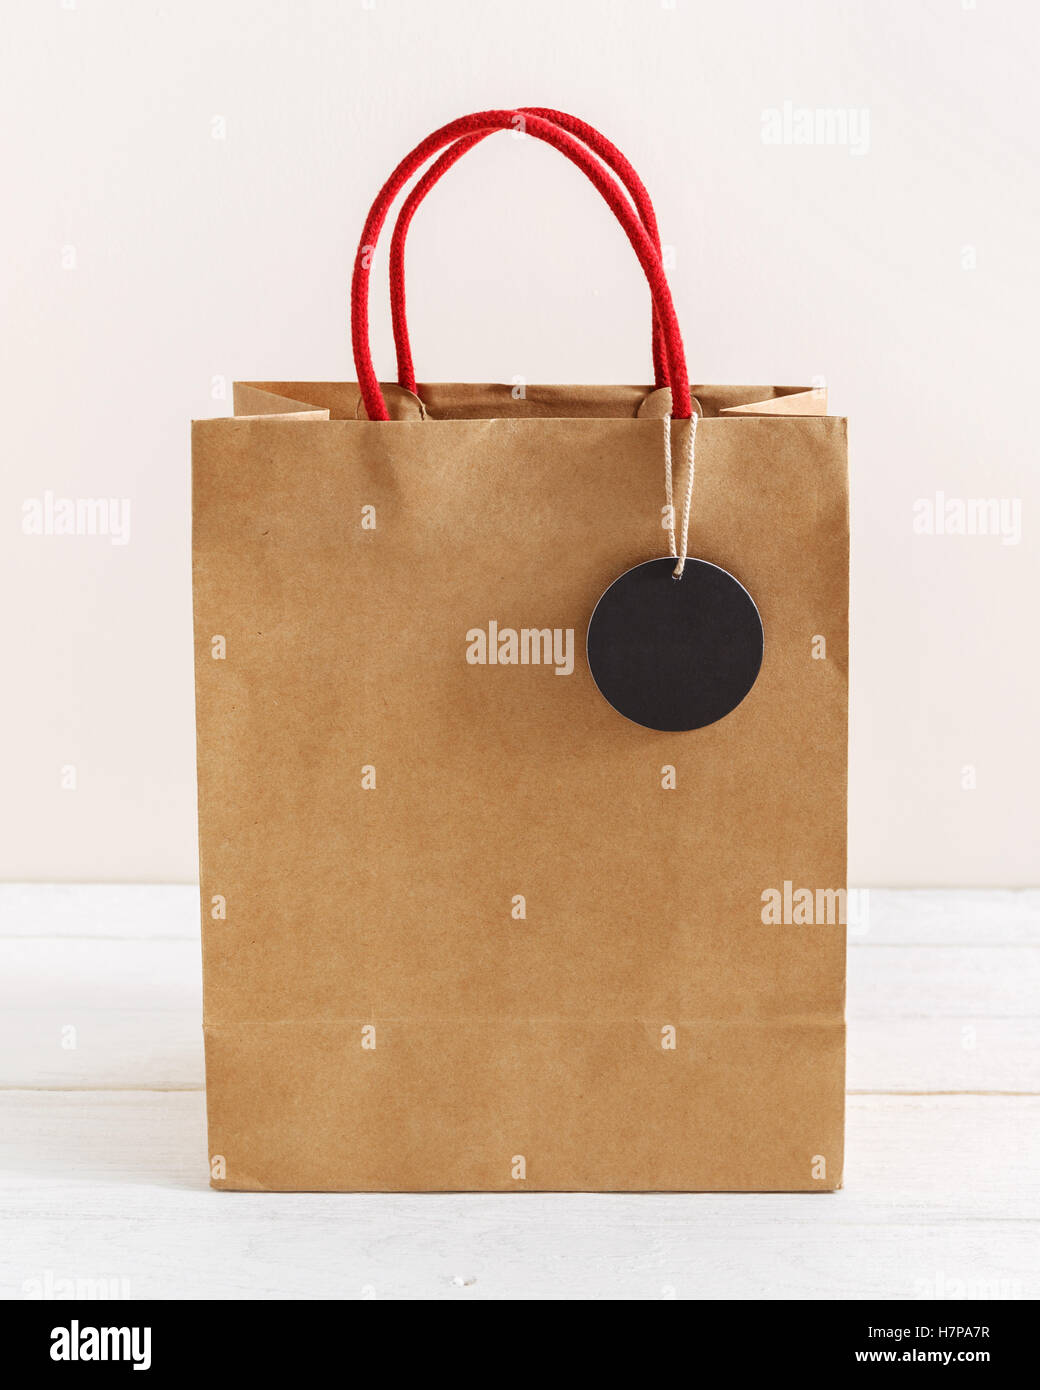 Download Brown Paper Shopping Bag With Black Tag And Red Rope Handle Stock Photo Alamy Yellowimages Mockups